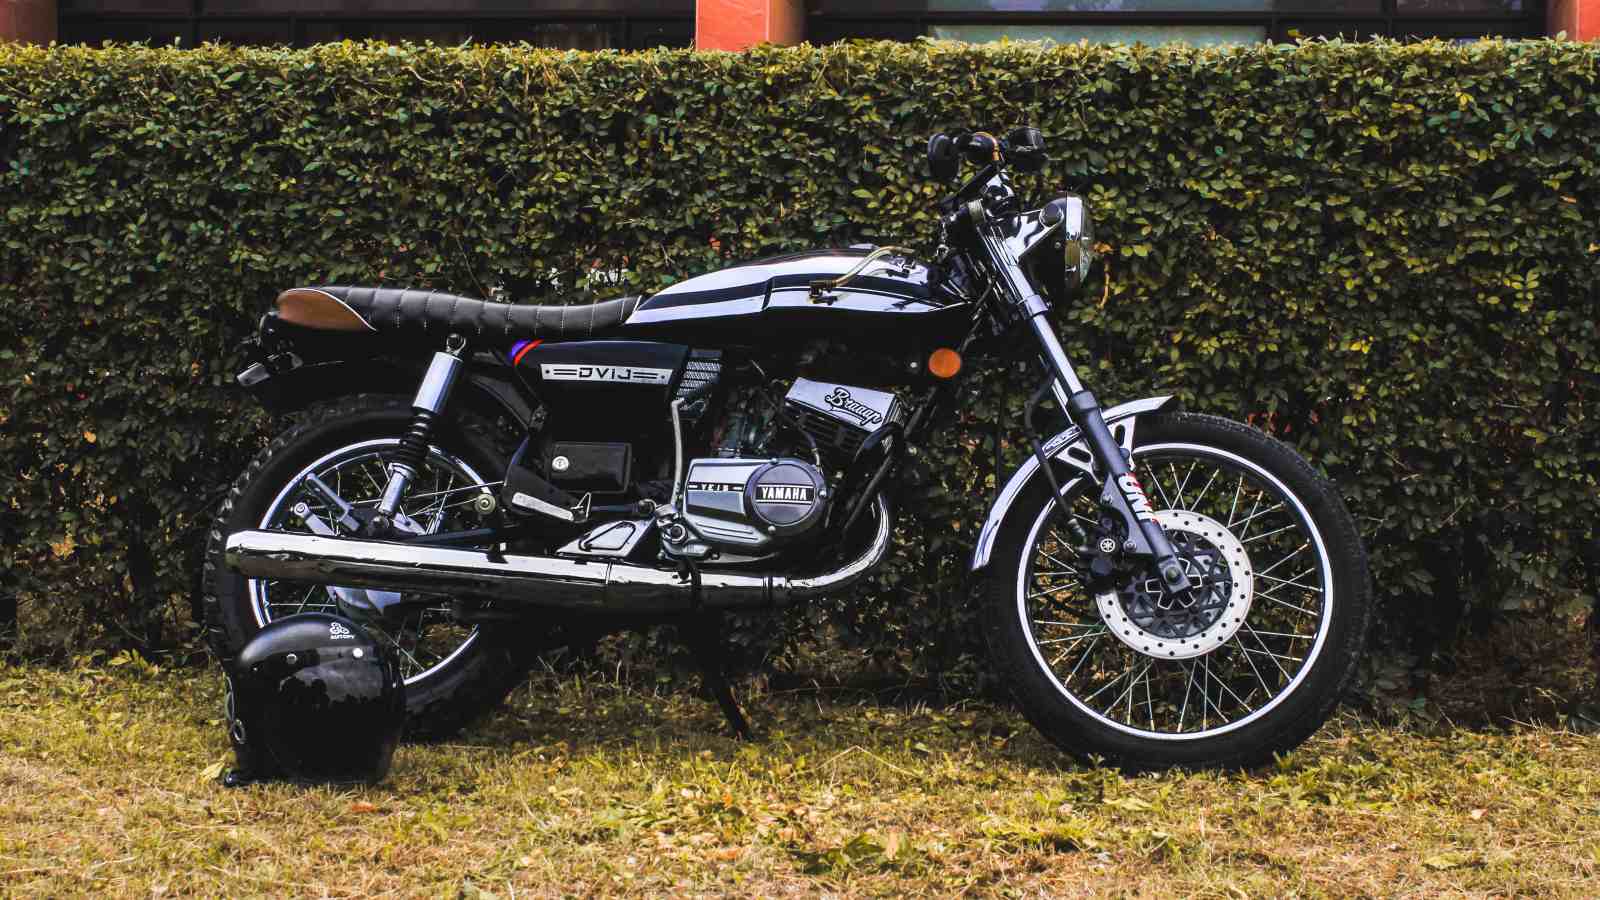 Customised Yamaha Rx 100 Is Reborn As A Cafe Racer Motoroids